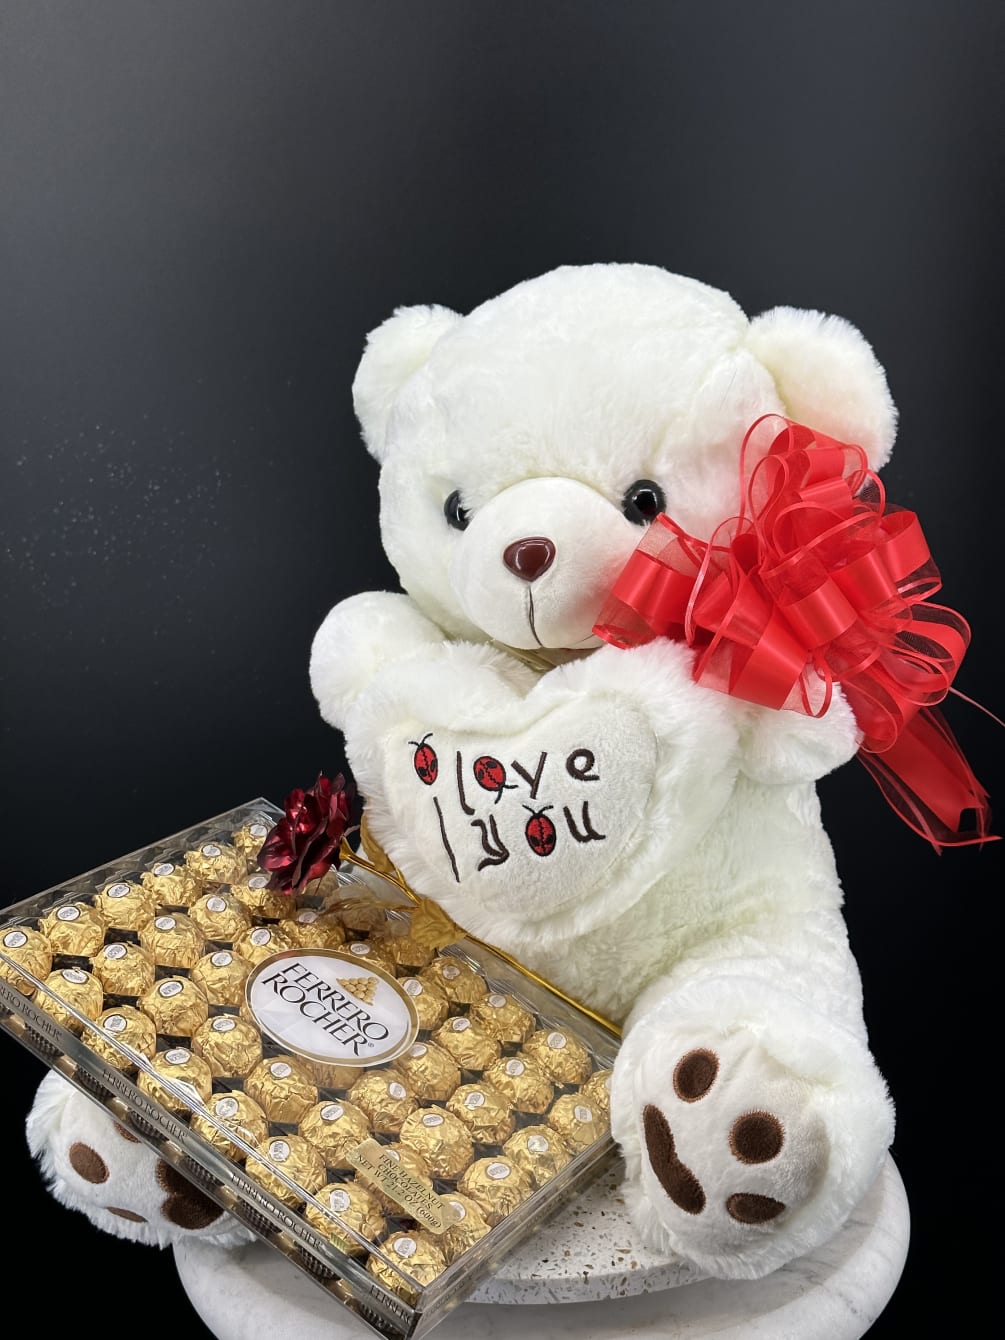 A plush Teddy Bear with chocolate is amazing gift to make a